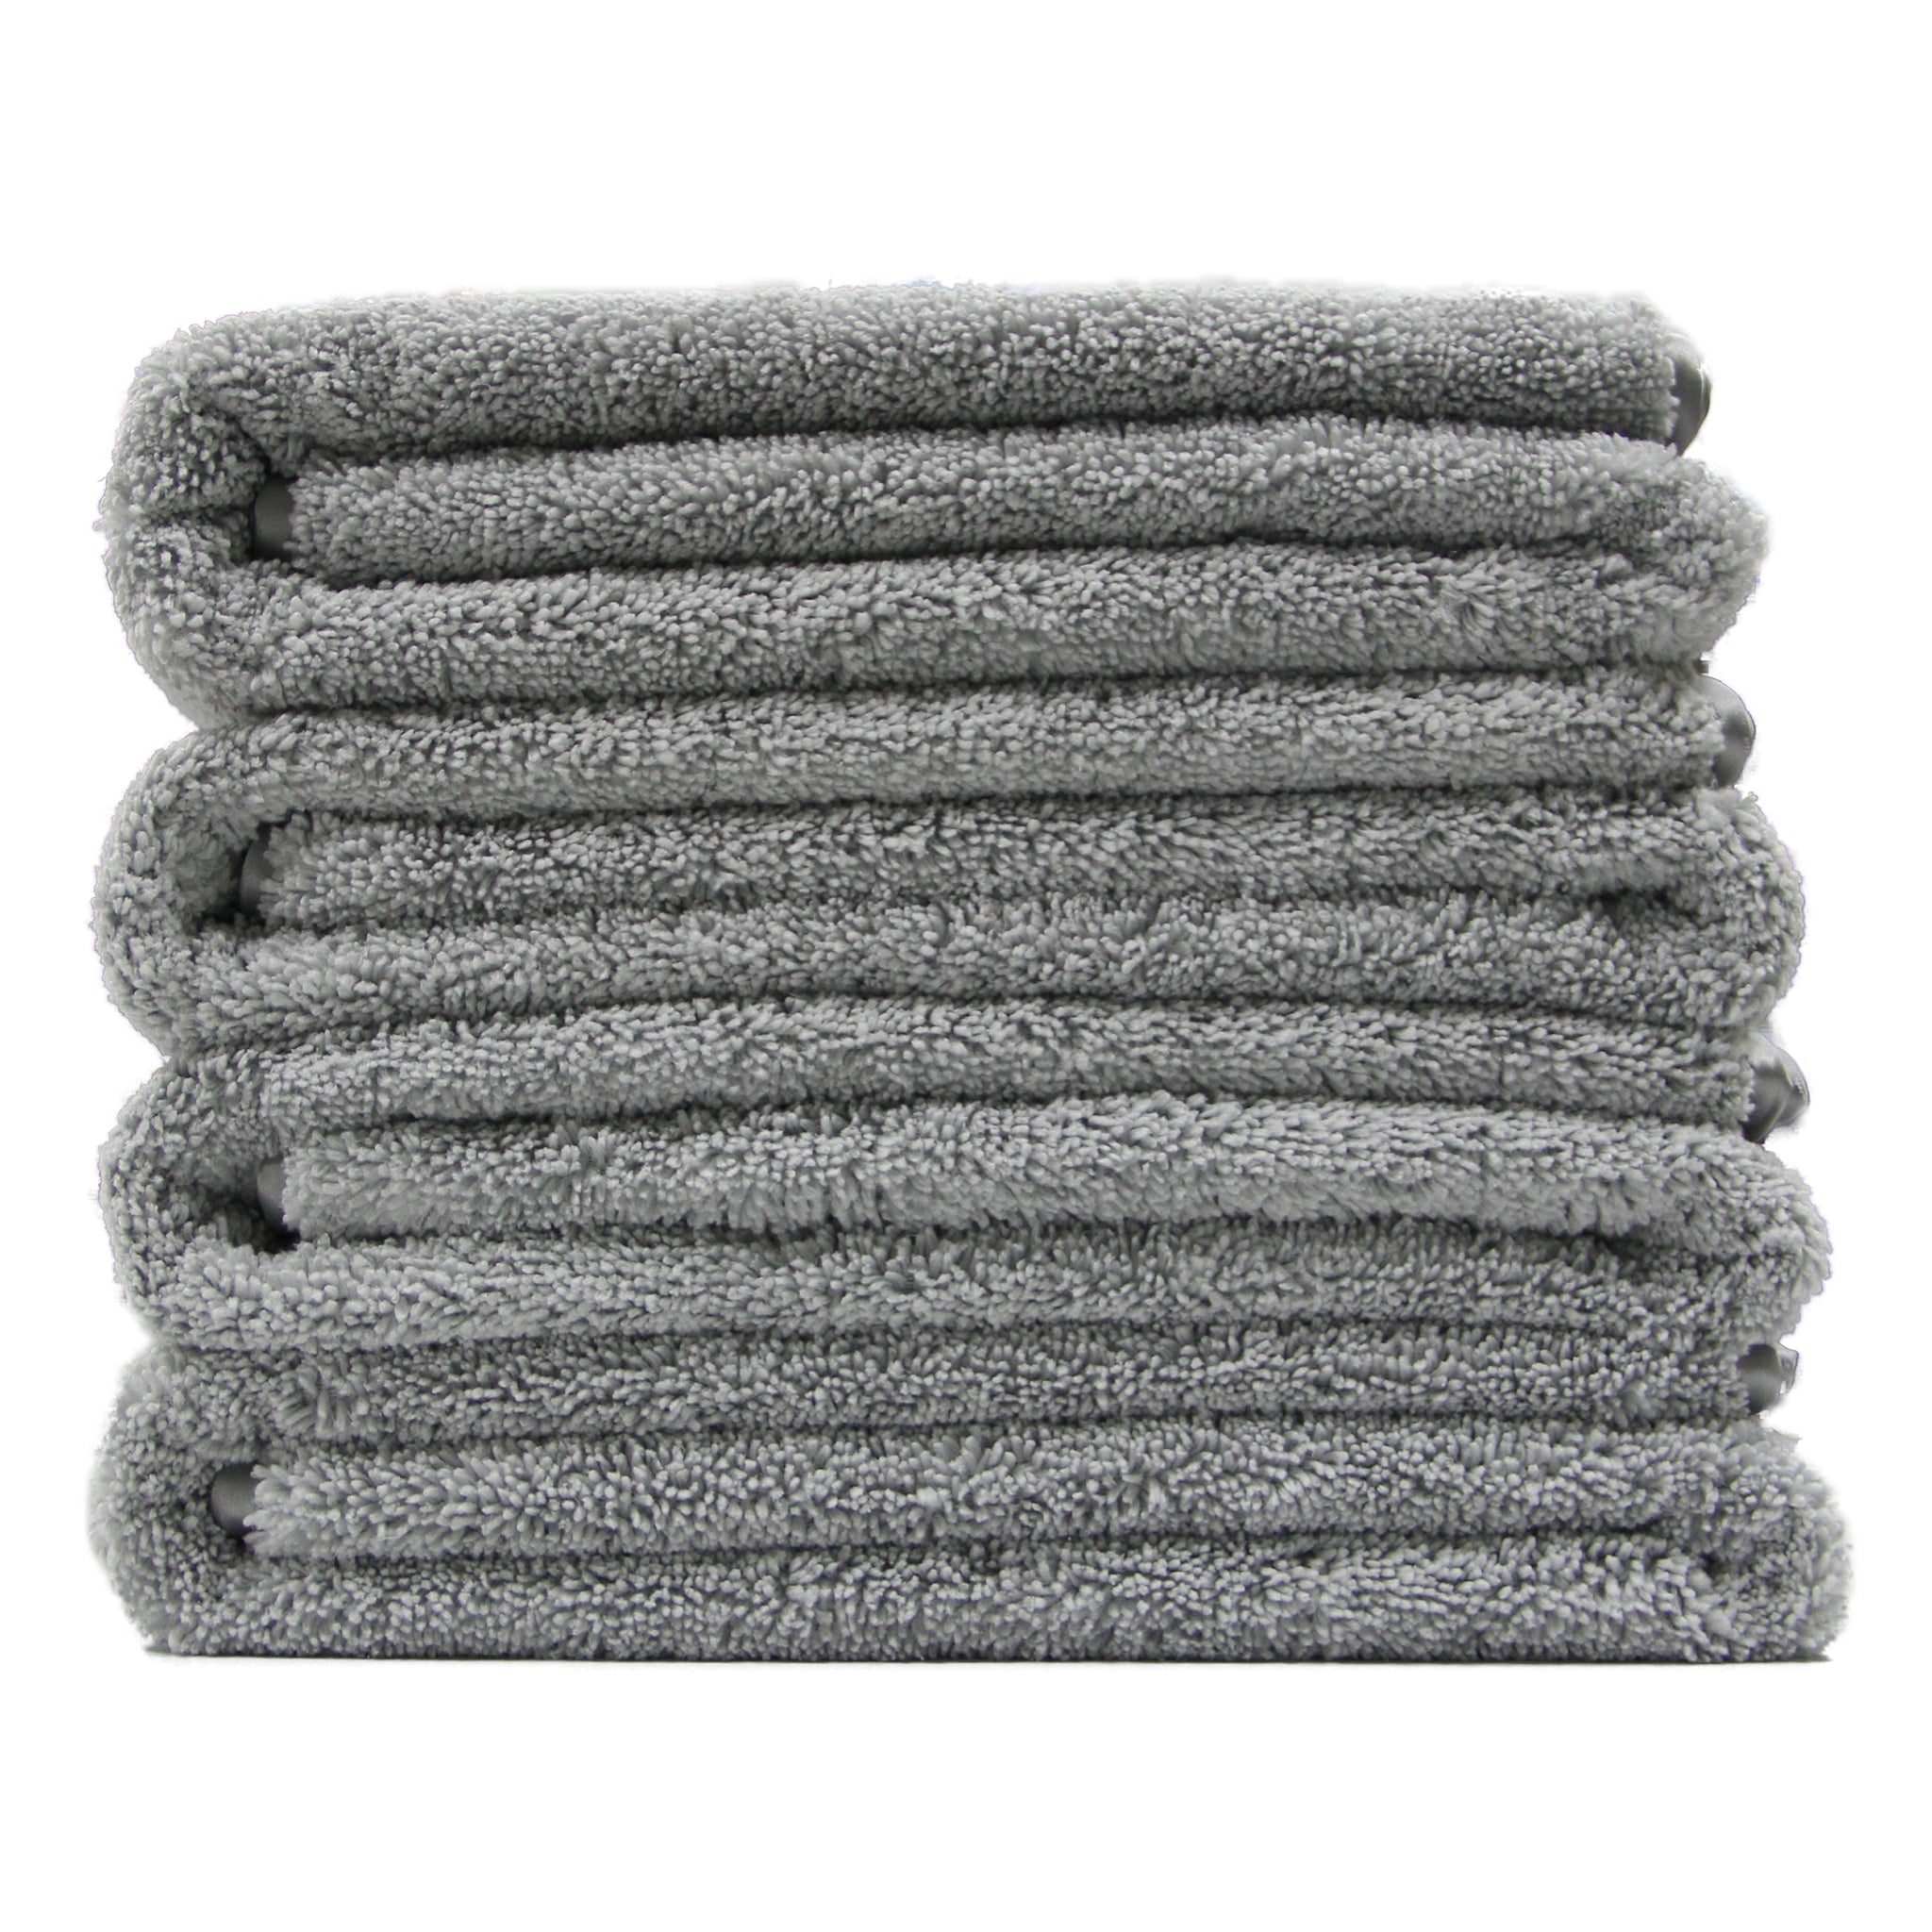 POLYTE Oversize, 60 x 30 in., Quick Dry Lint Free Microfiber Bath Towel  Set, 6 Piece (Gray, Waffle Weave)